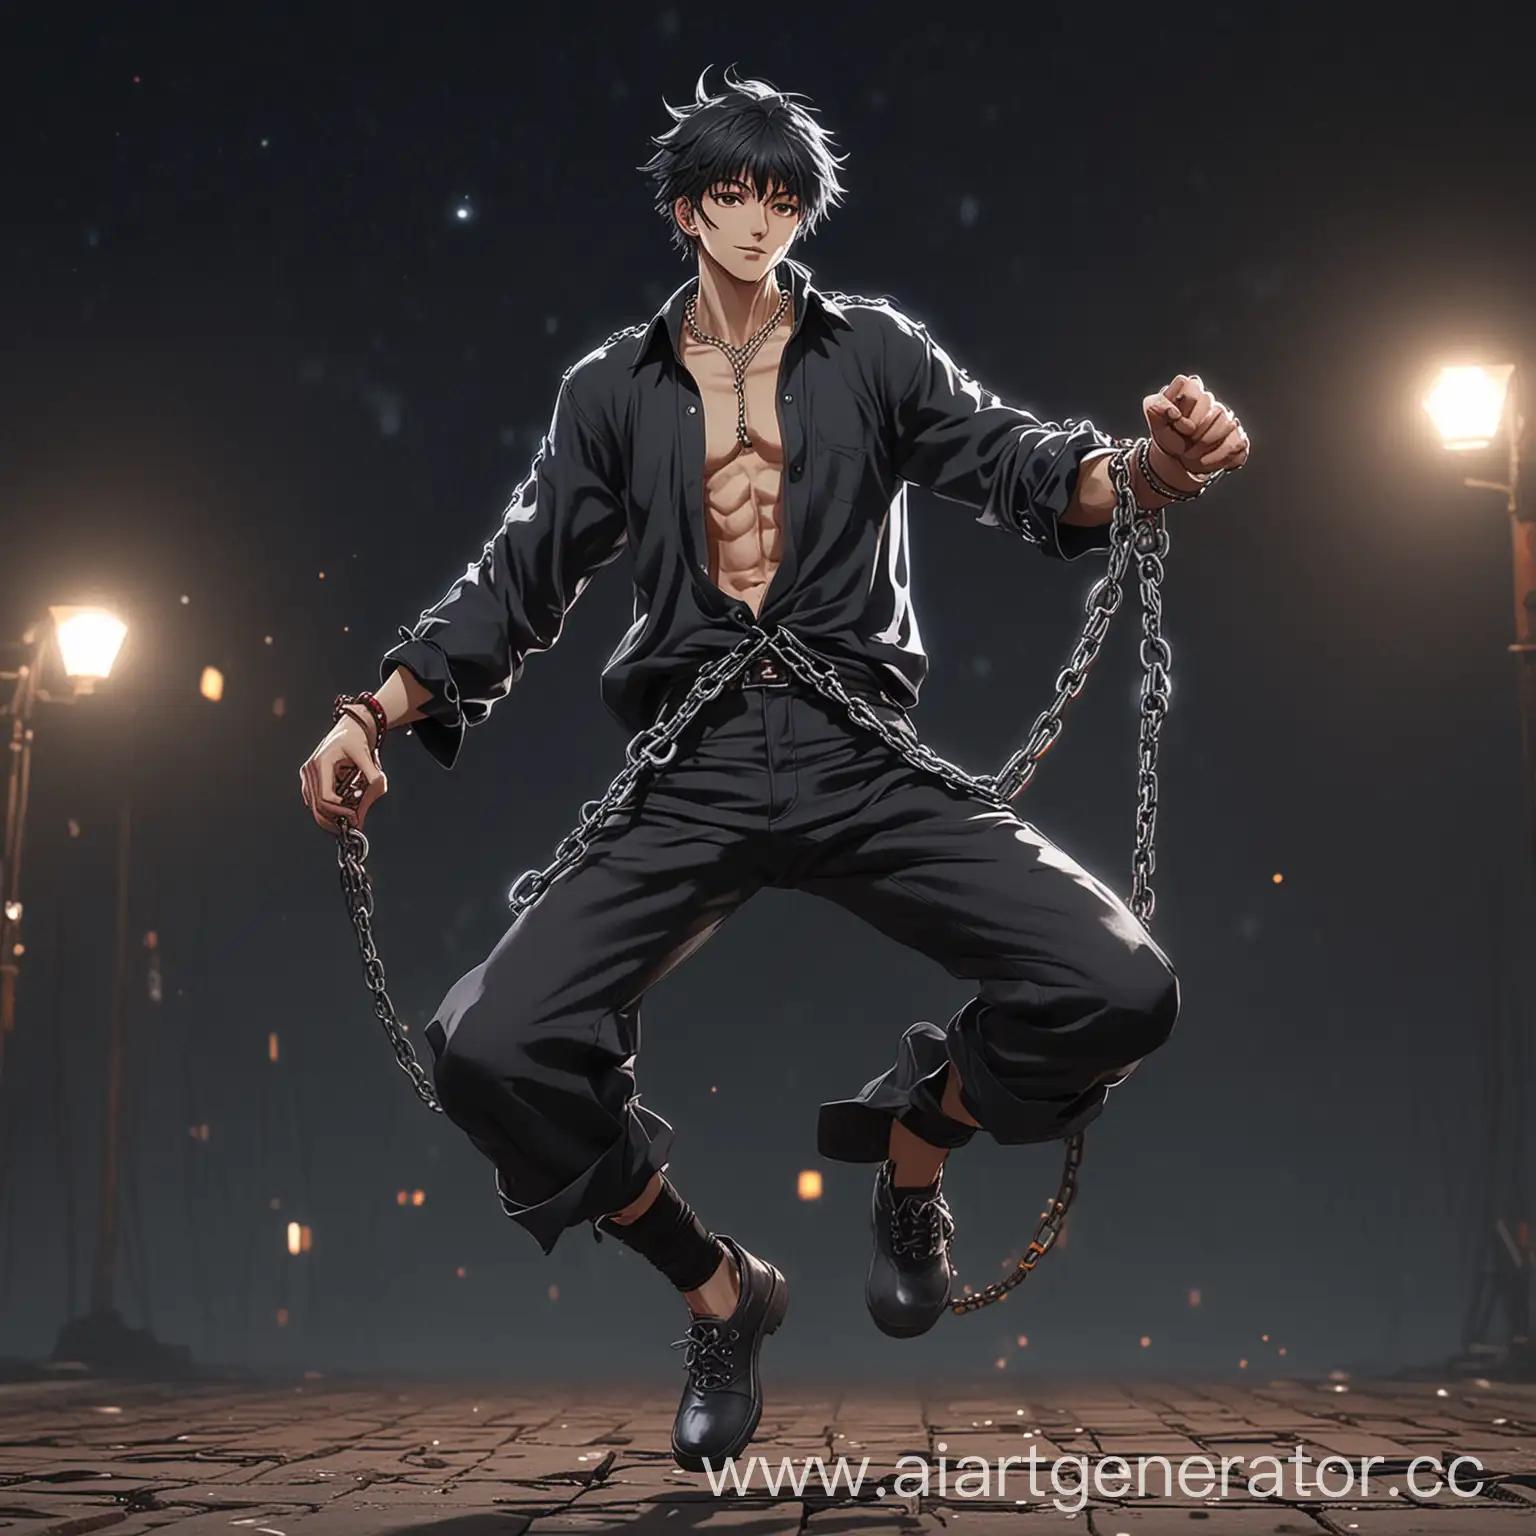 Energetic-Anime-Male-Character-Dancing-Joyfully-in-Chains-at-Night